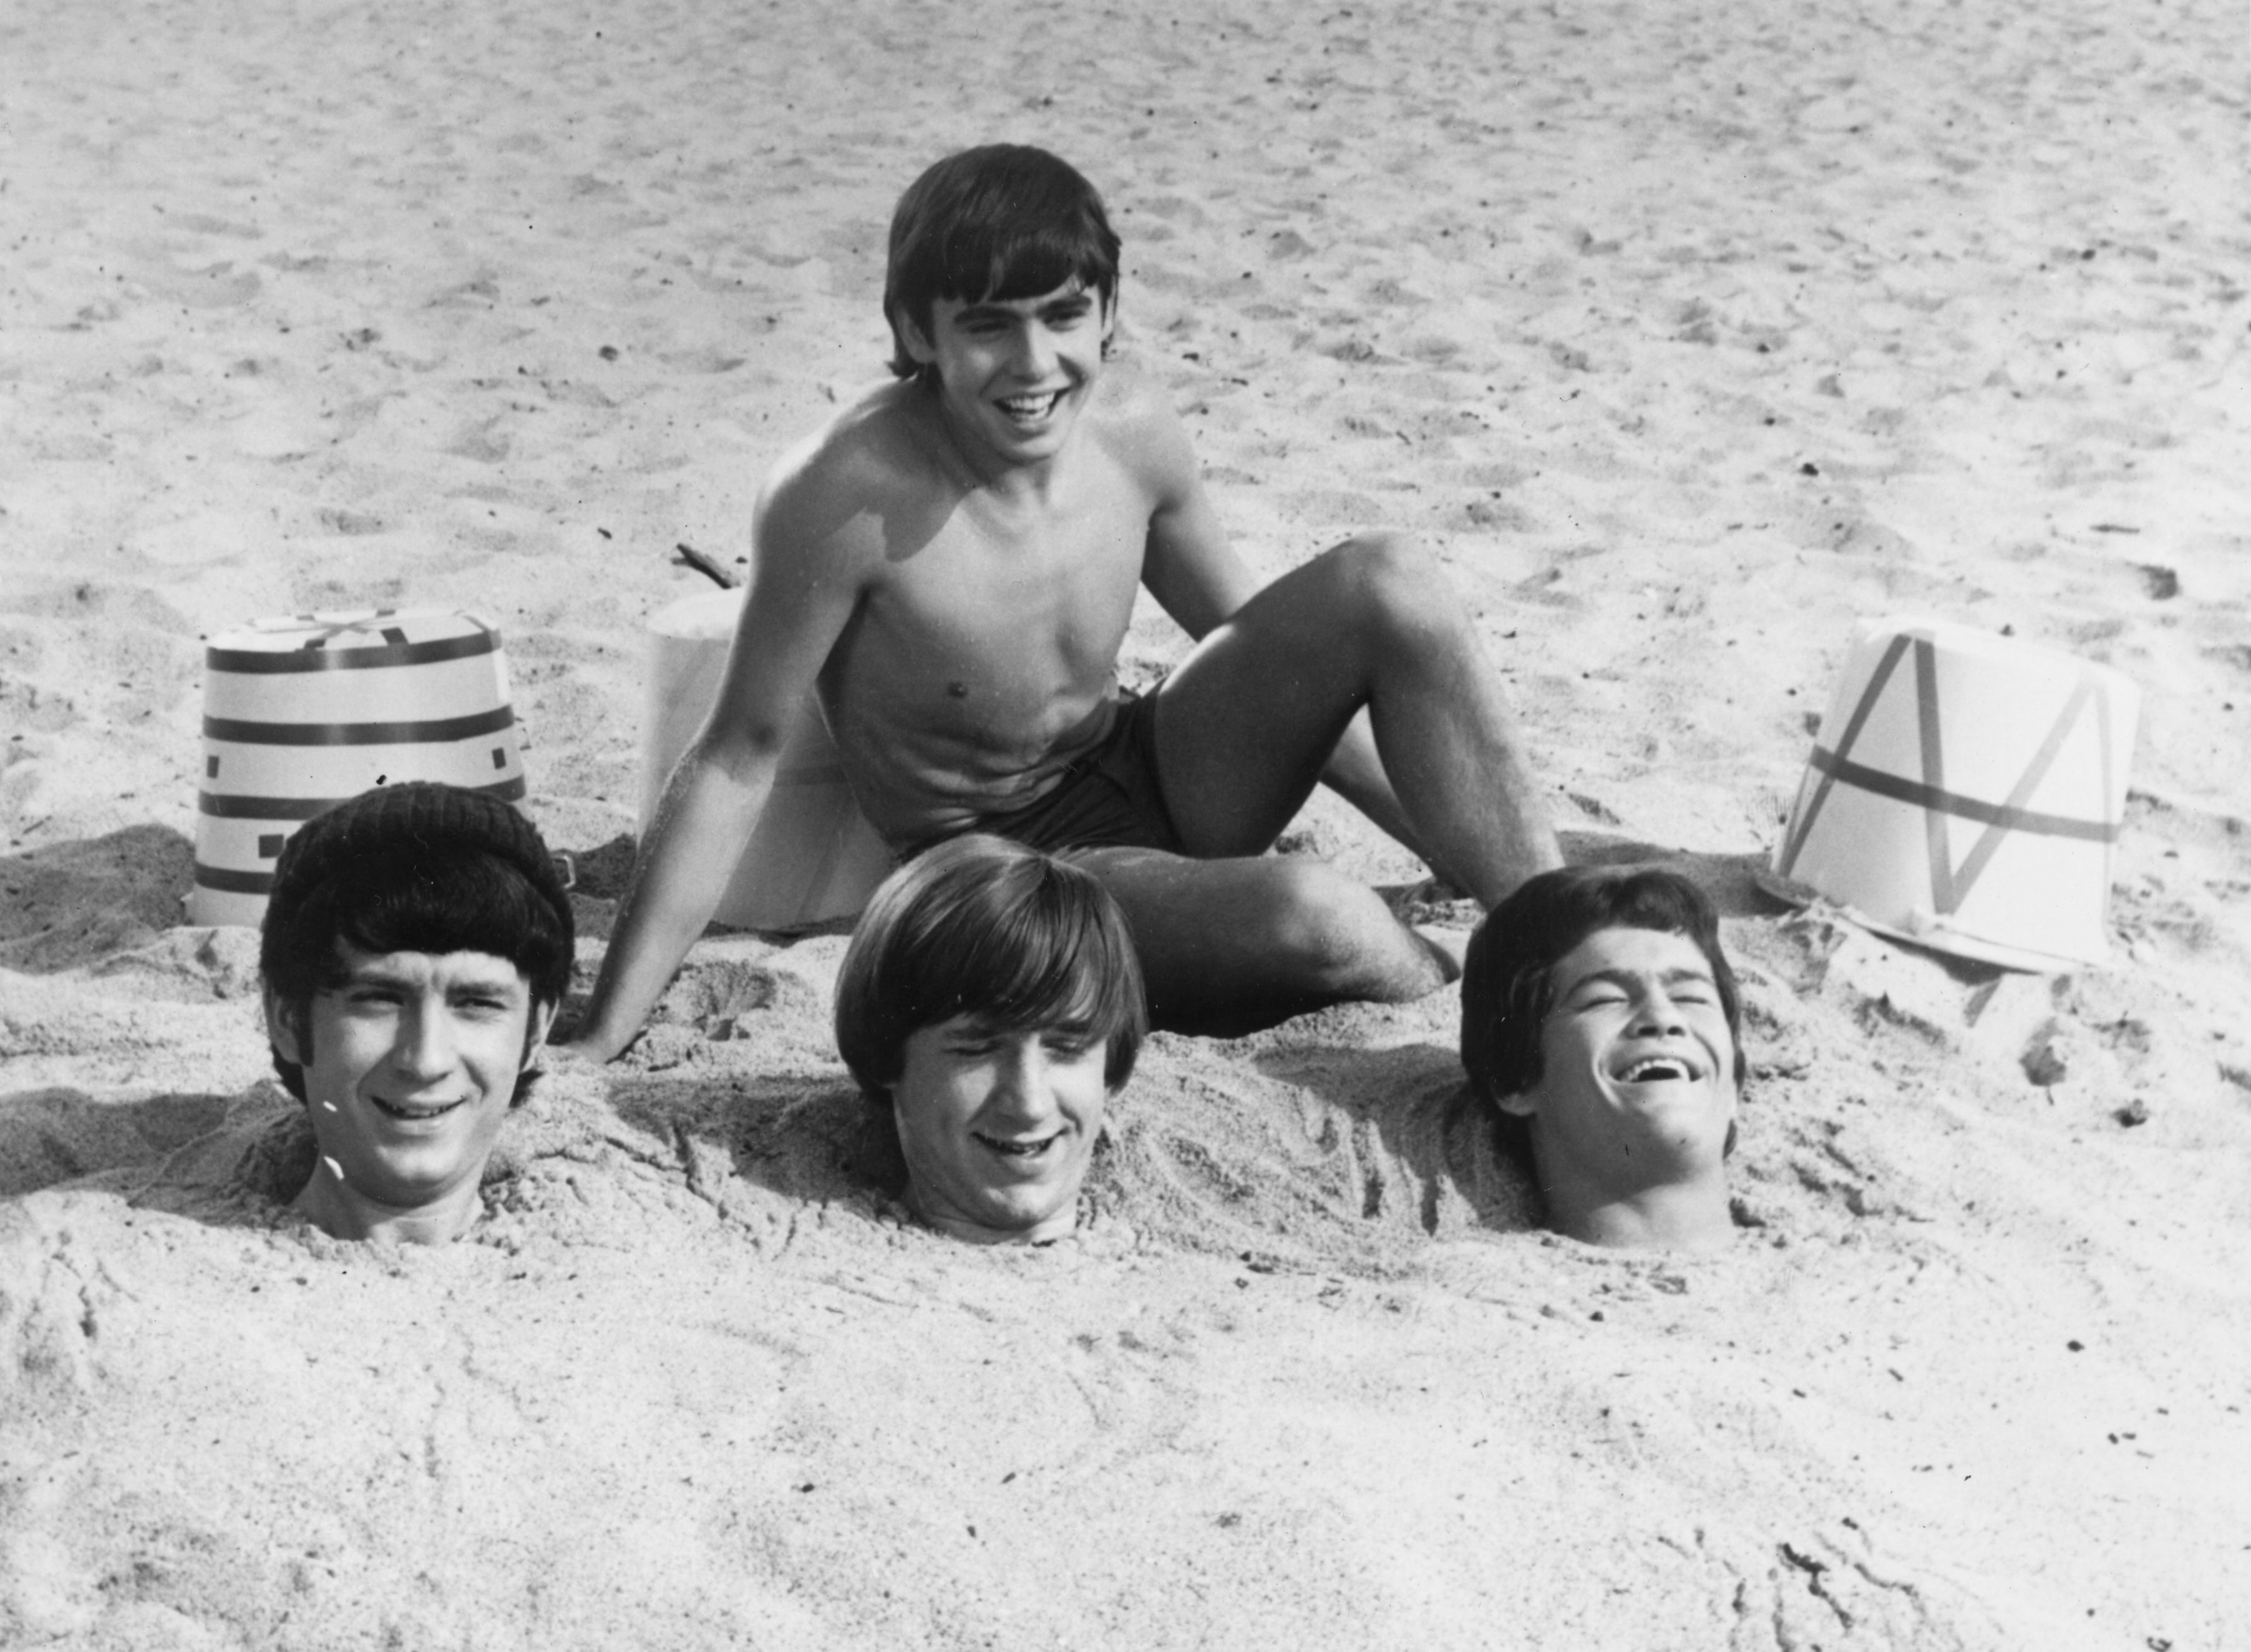 The Monkees' Mike Nesmith, Davy Jones, Peter Tork and Micky Dolenz at a beach